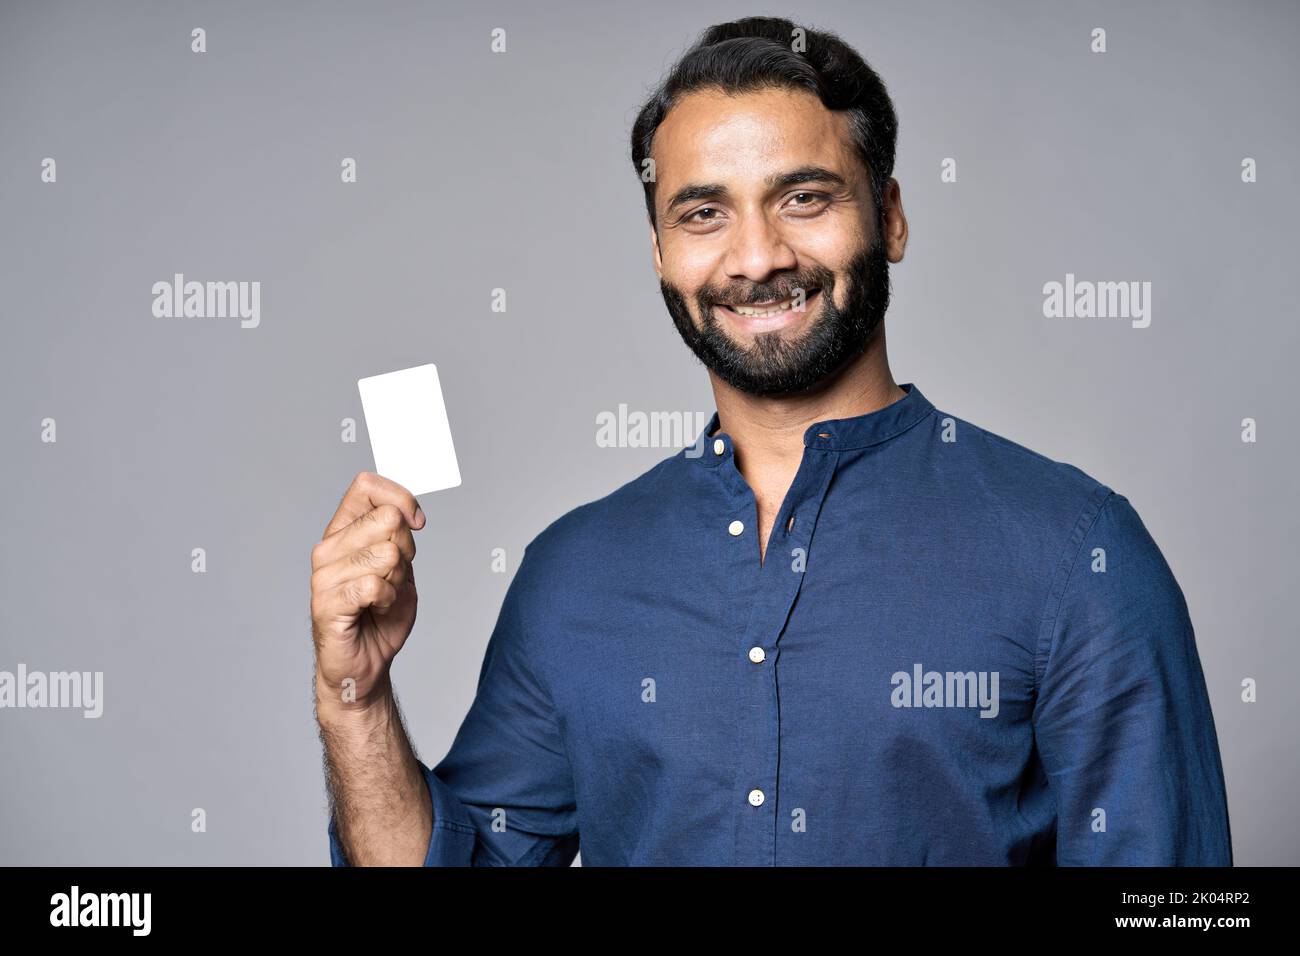 smiling indian business man holding credit card isolated on gray background 2K04RP2